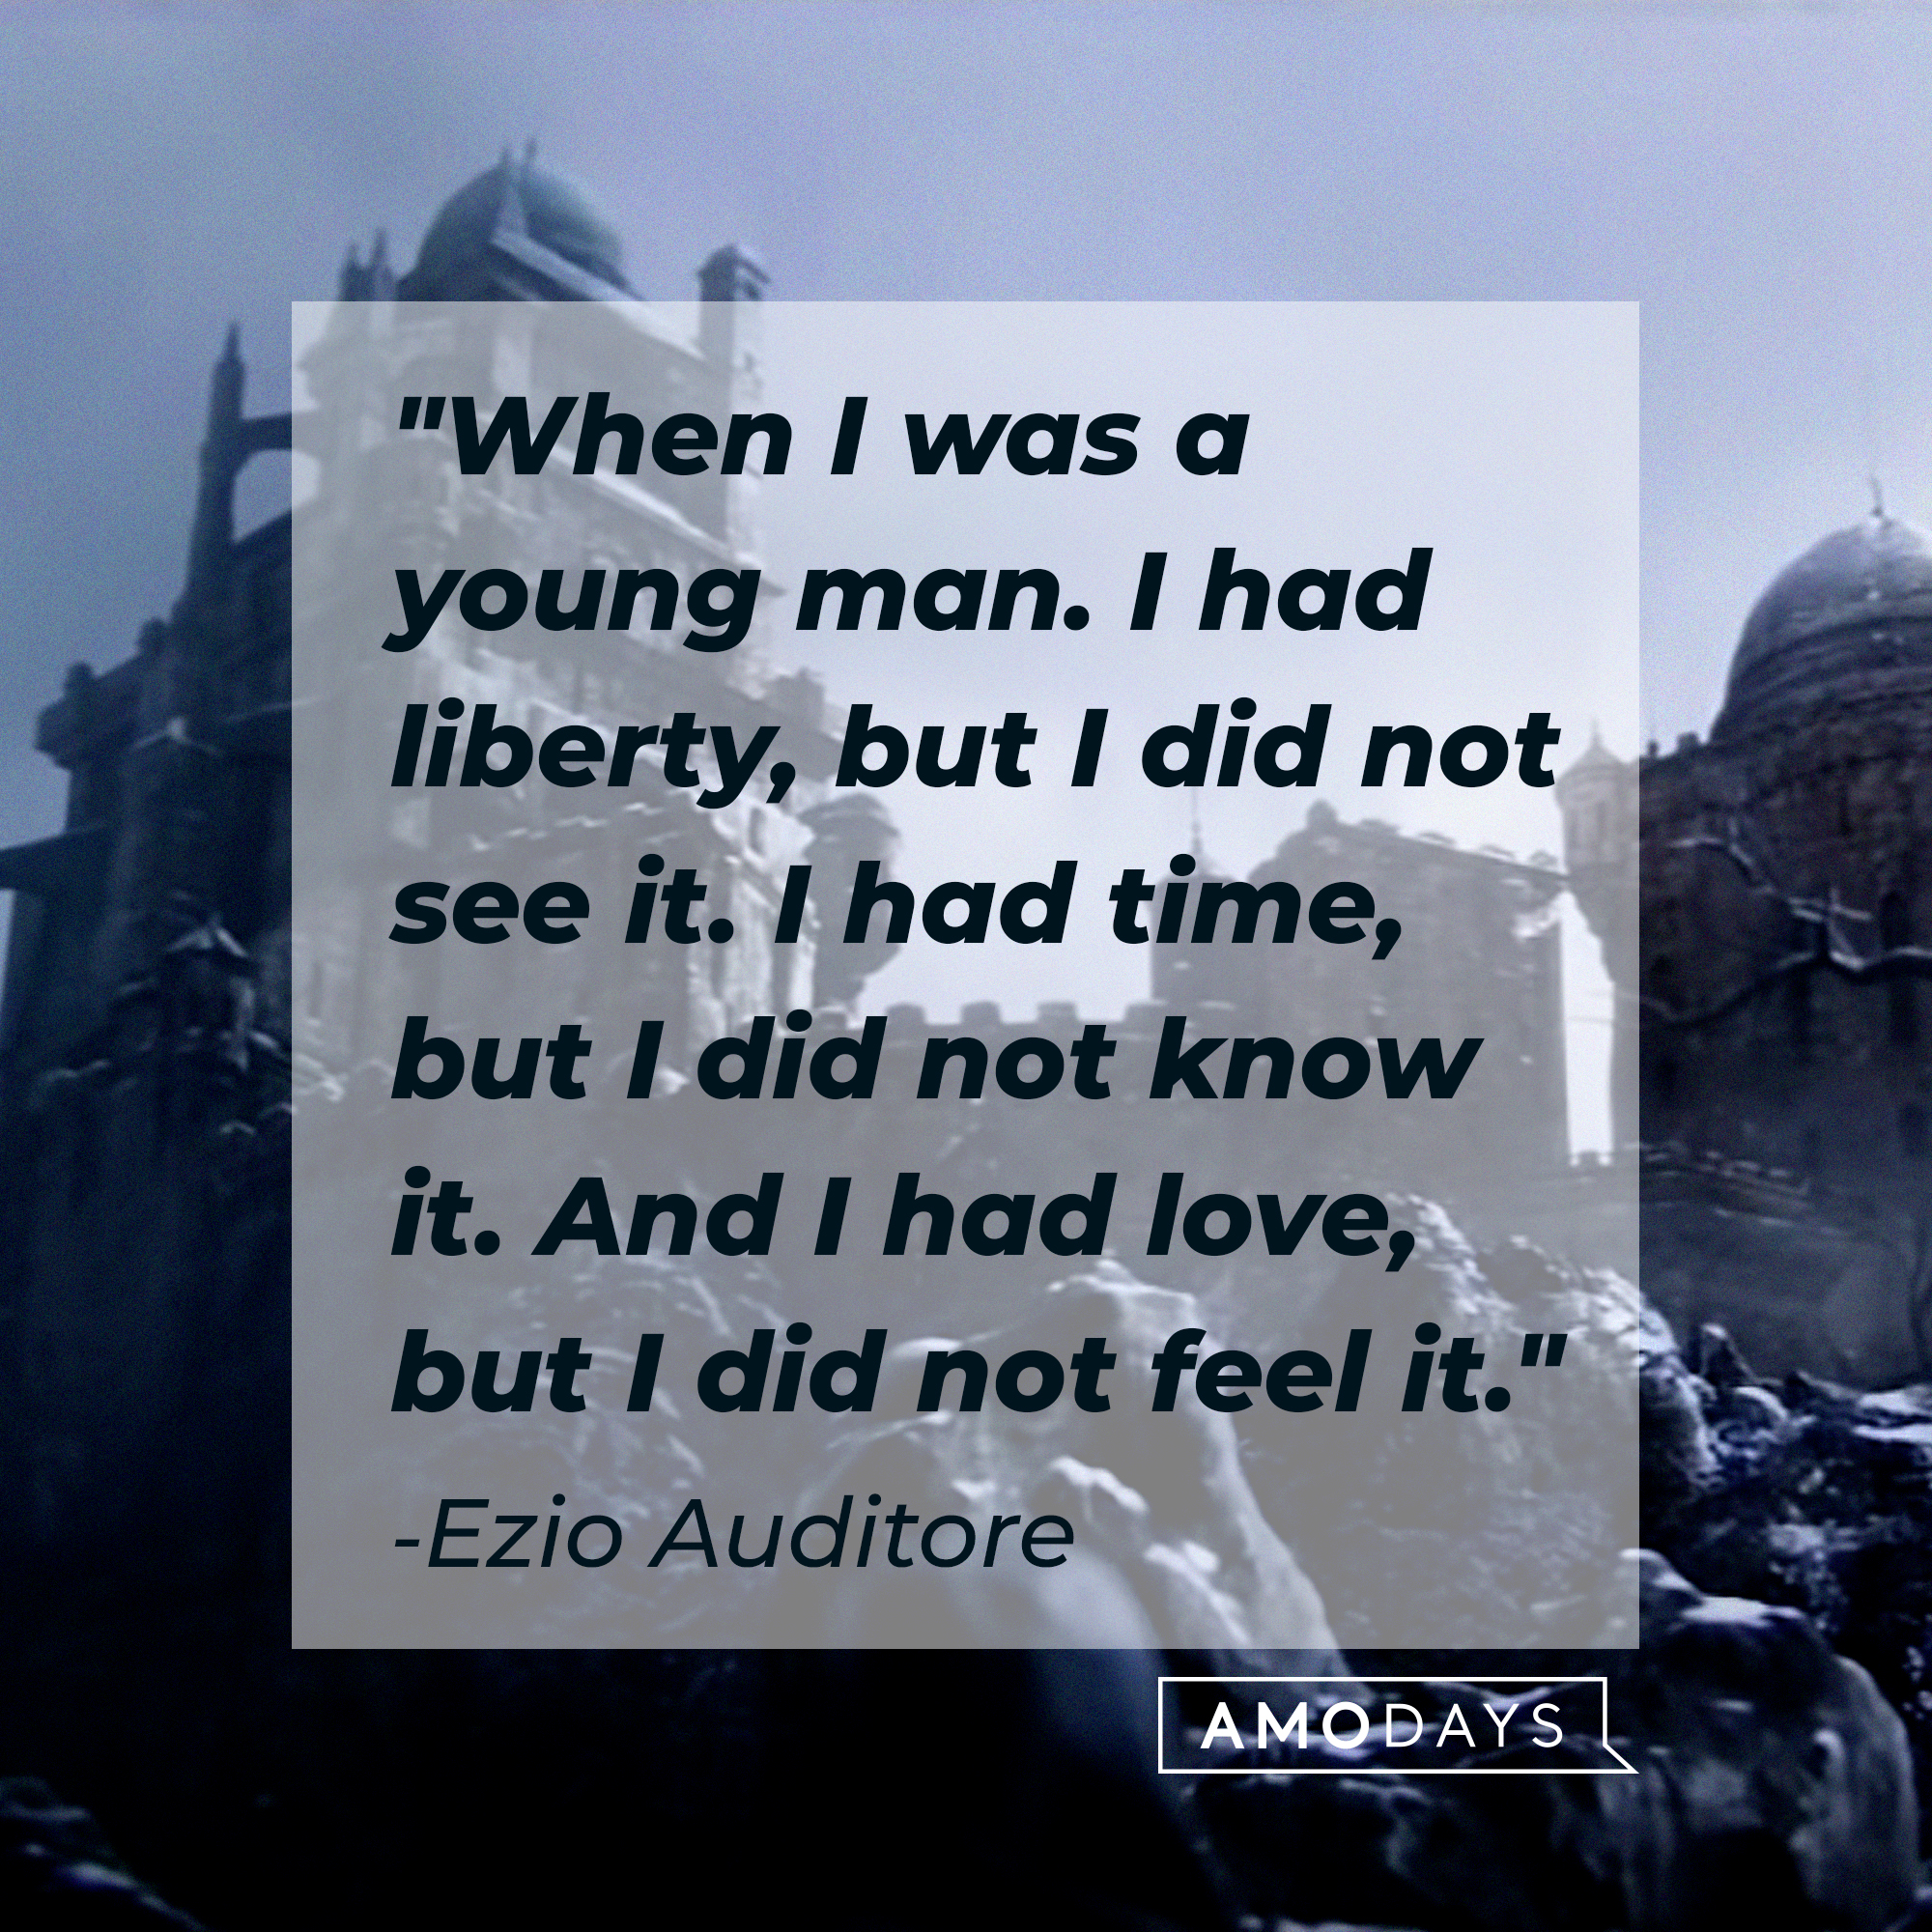 Enzo Auditore's quote: "When I was a young man. I had liberty, but I did not see it. I had time, but I did not know it. And I had love, but I did not feel it." | Source: youtube.com/UbisoftNA